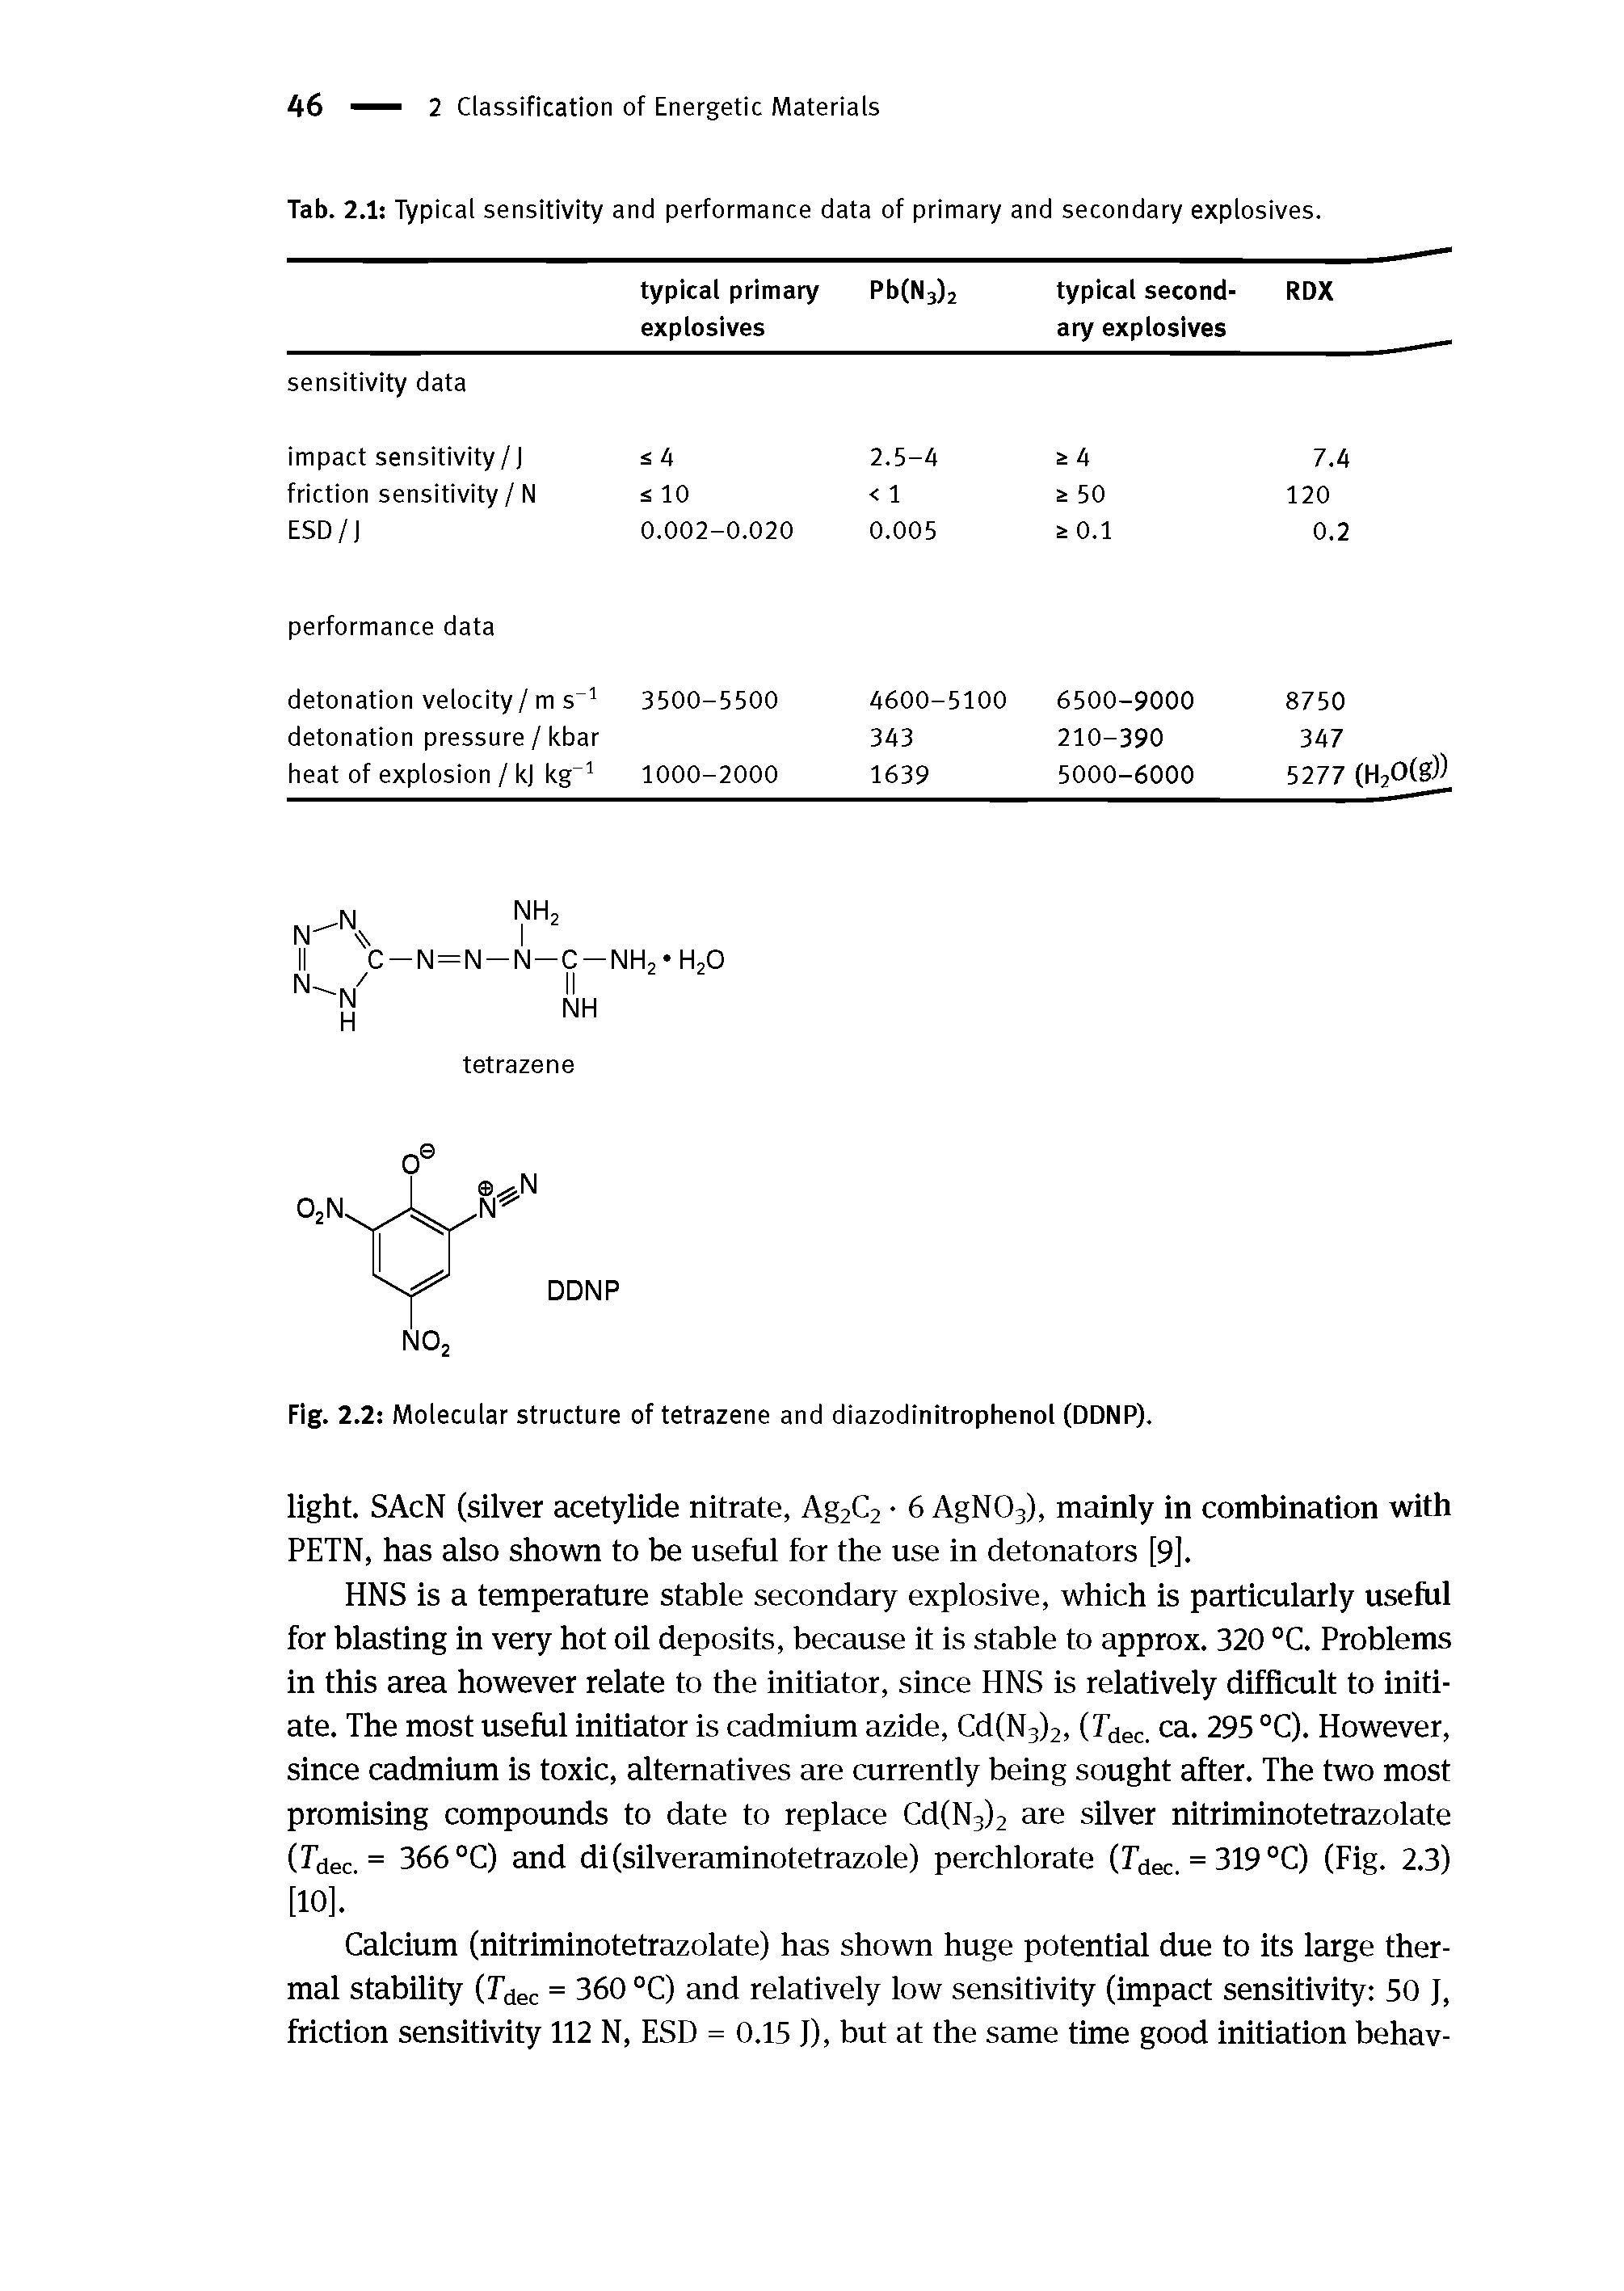 Tab. 2.1 Typical sensitivity and performance data of primary and secondary explosives.